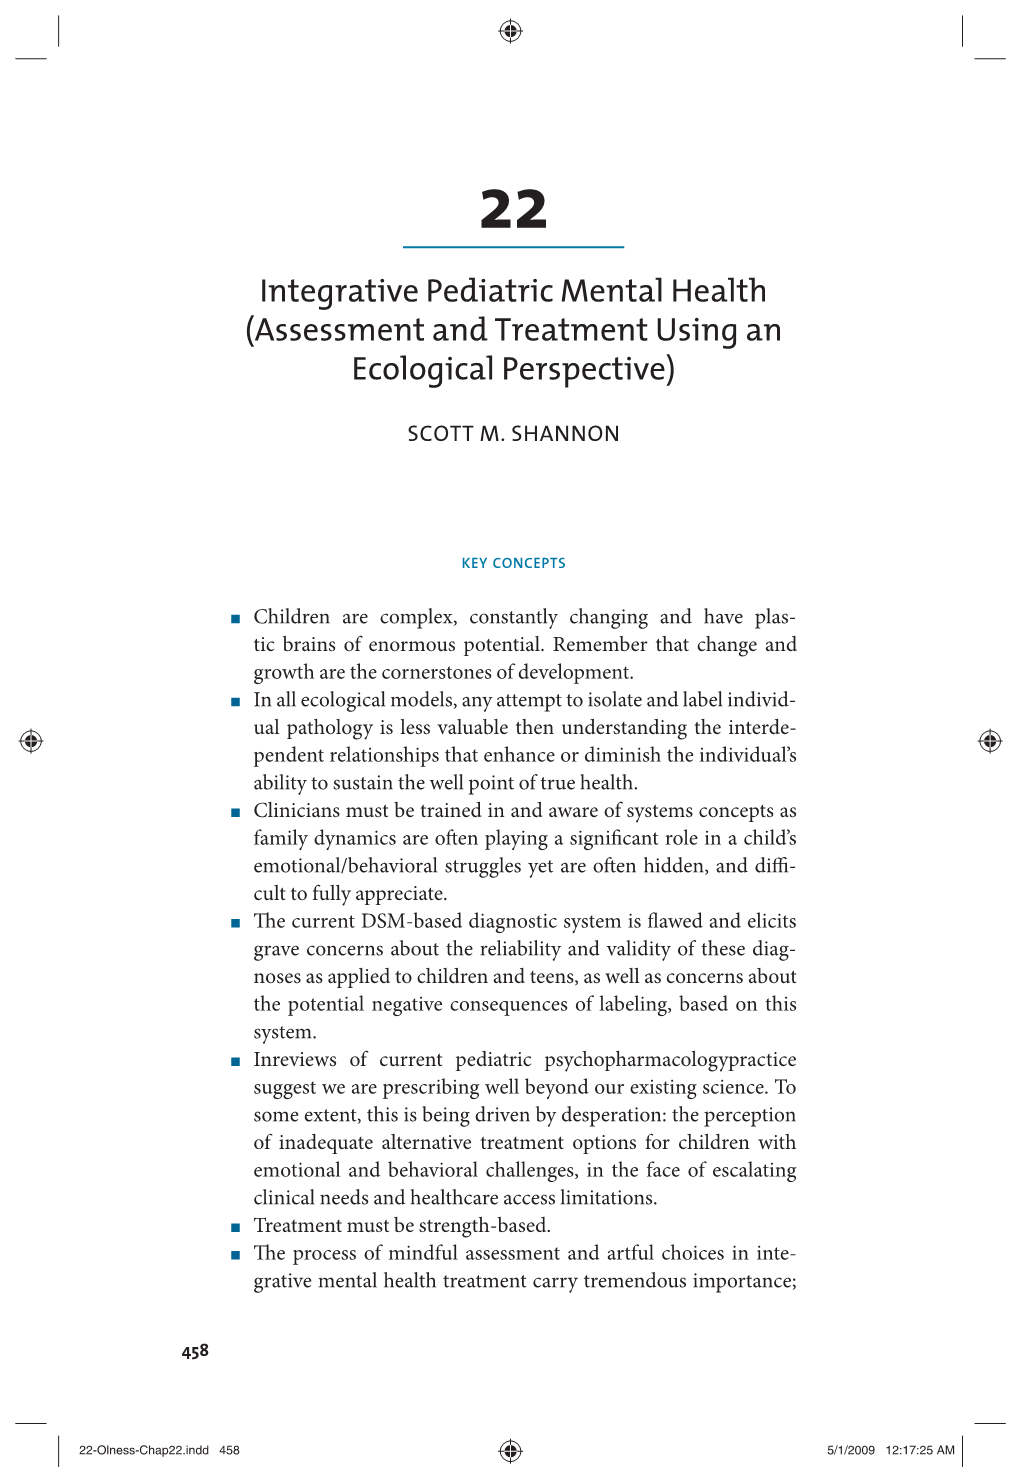 Integrative Pediatric Mental Health (Assessment and Treatment Using an Ecological Perspective)